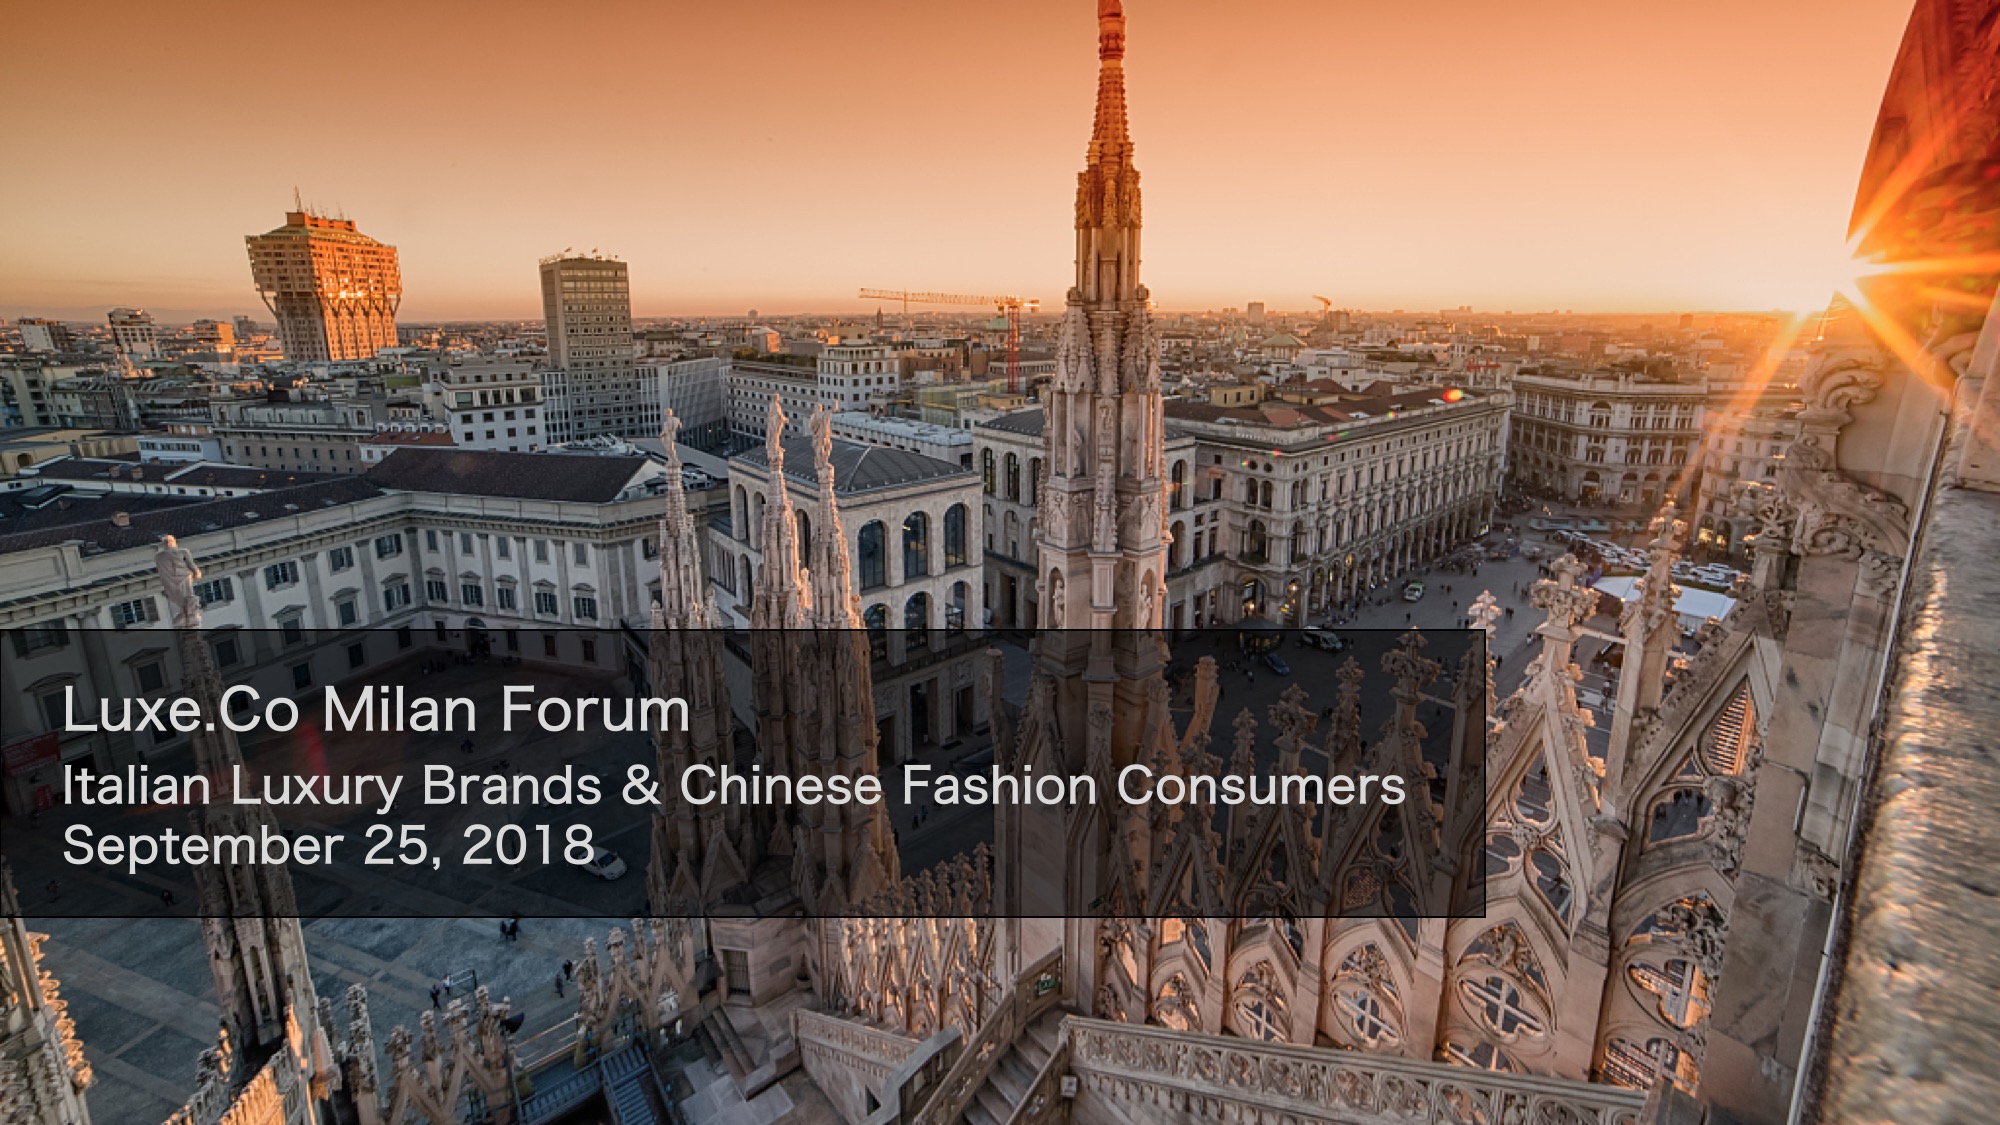 Luxe.Co Milan Forum: Italian Luxury Brands & Chinese Fashion Consumers (Sep 25, 2018)